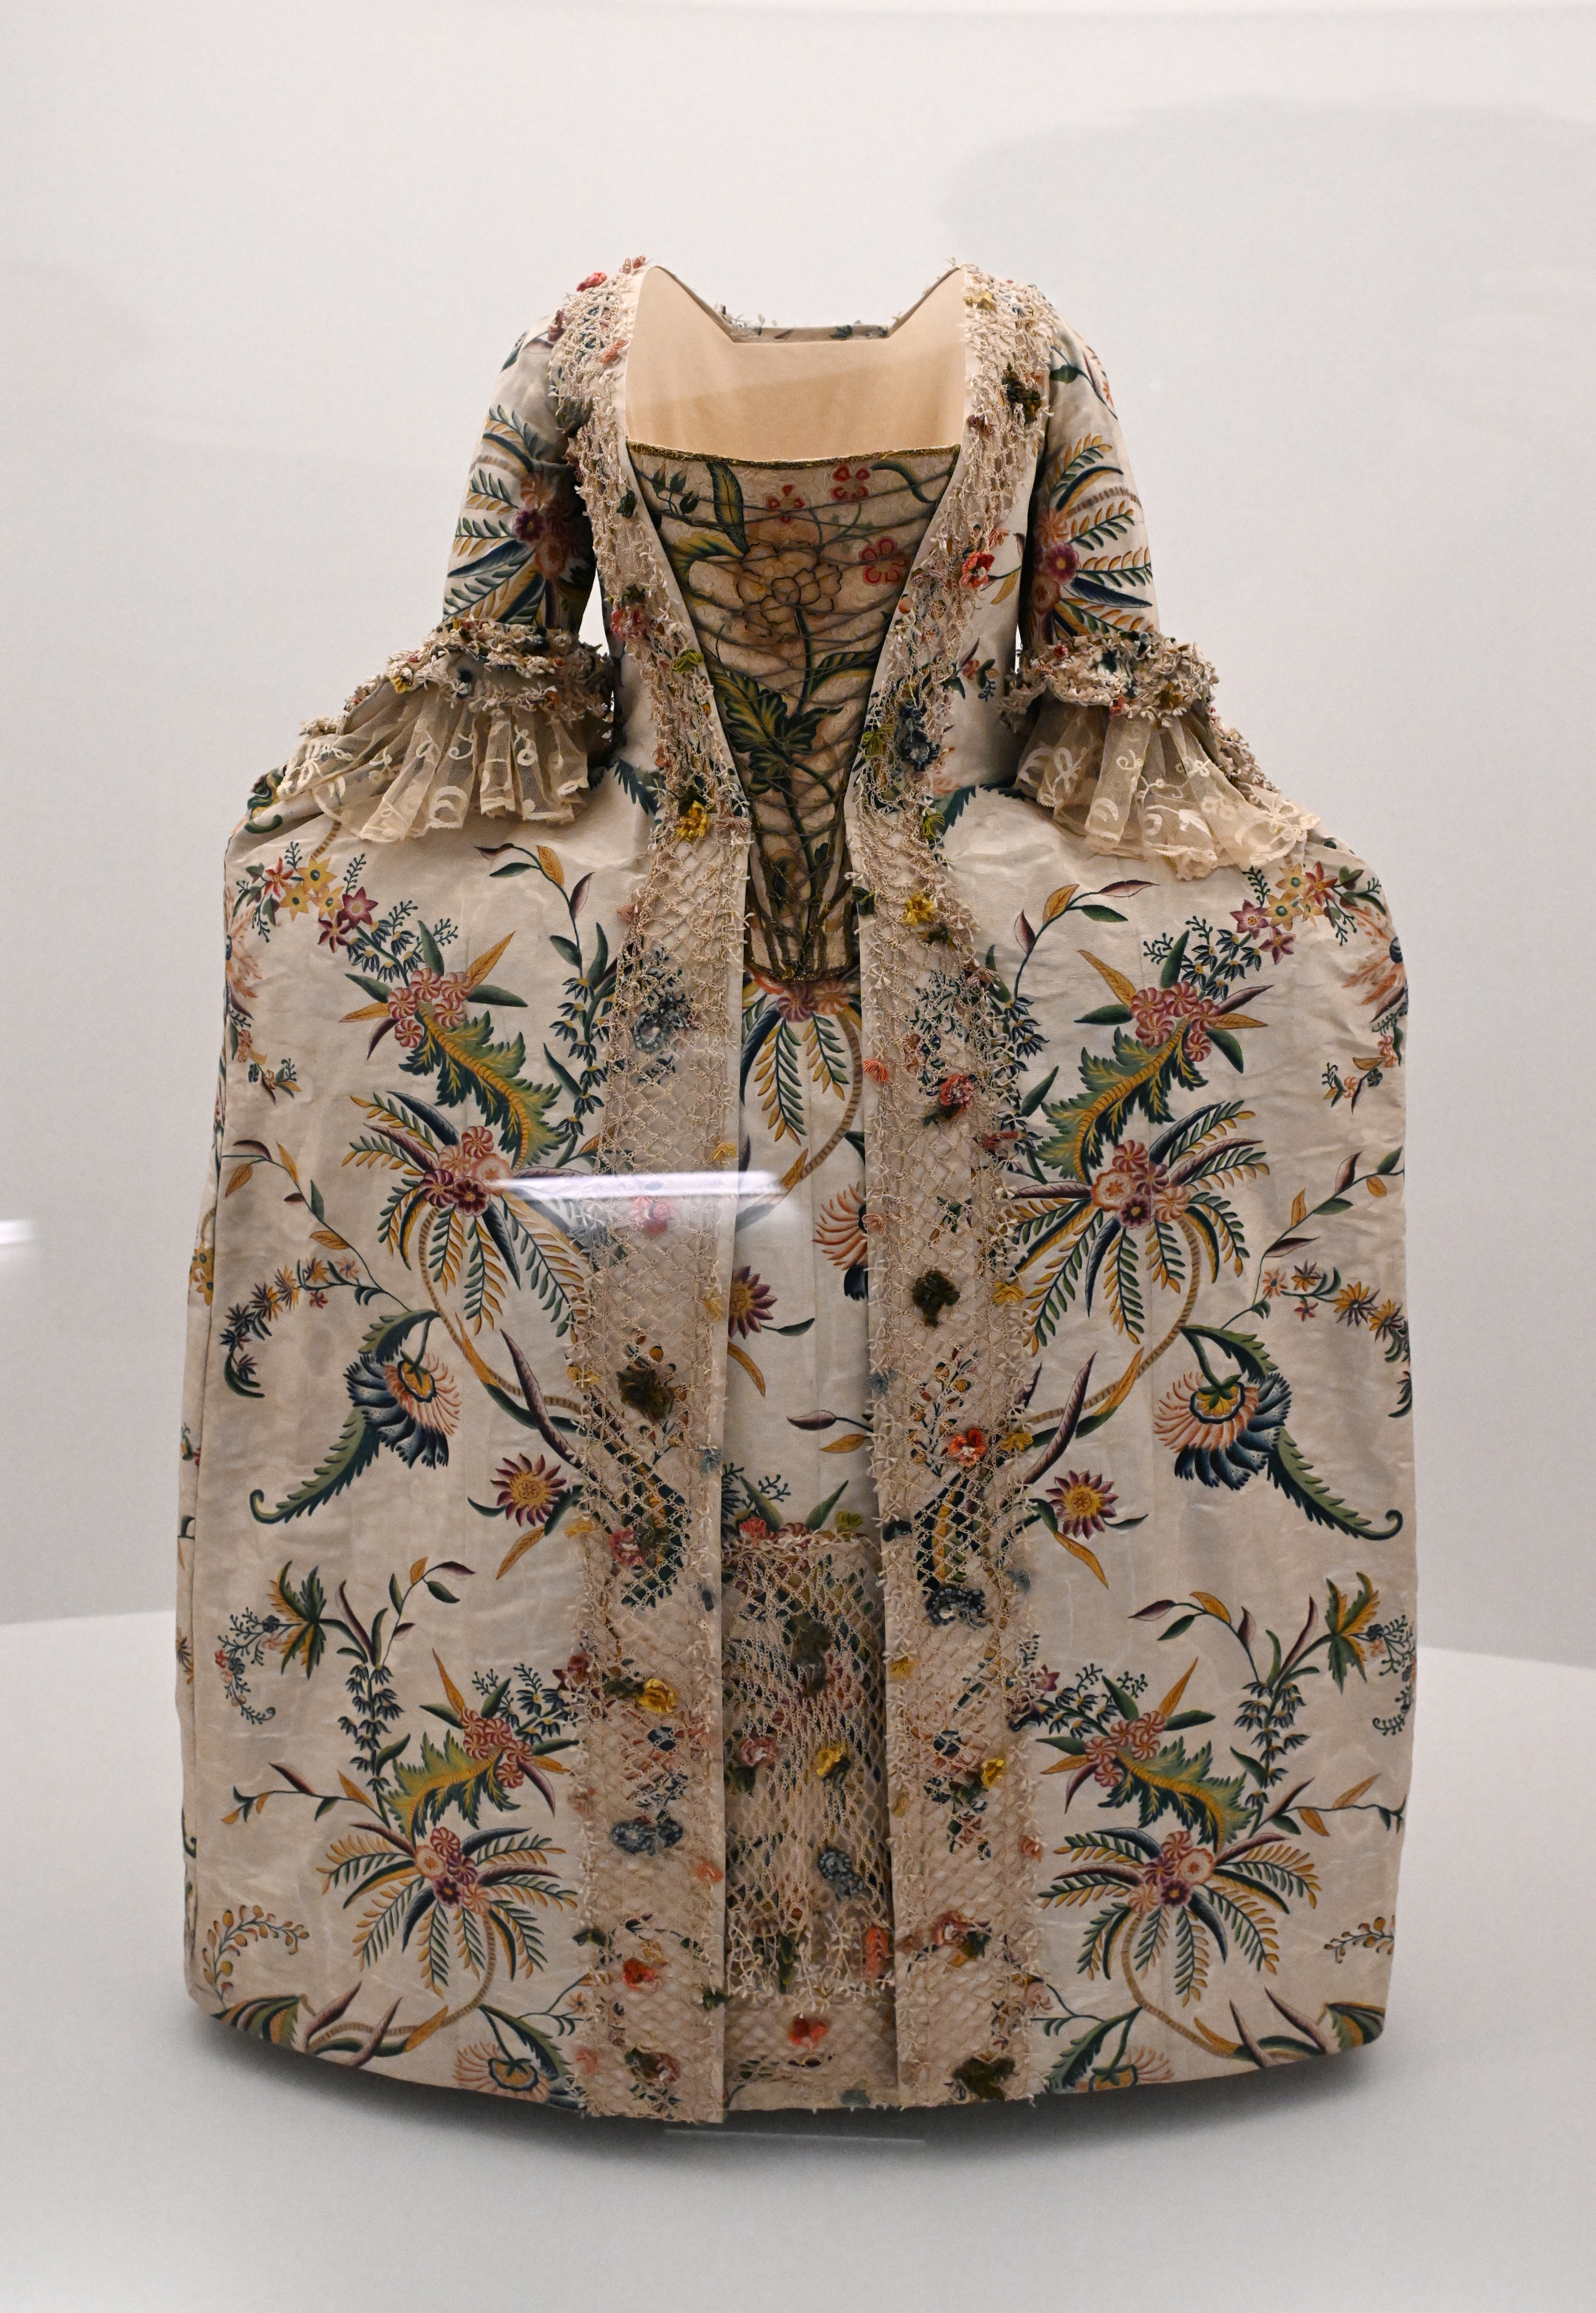 Ornate floral embroidered historical dress on display